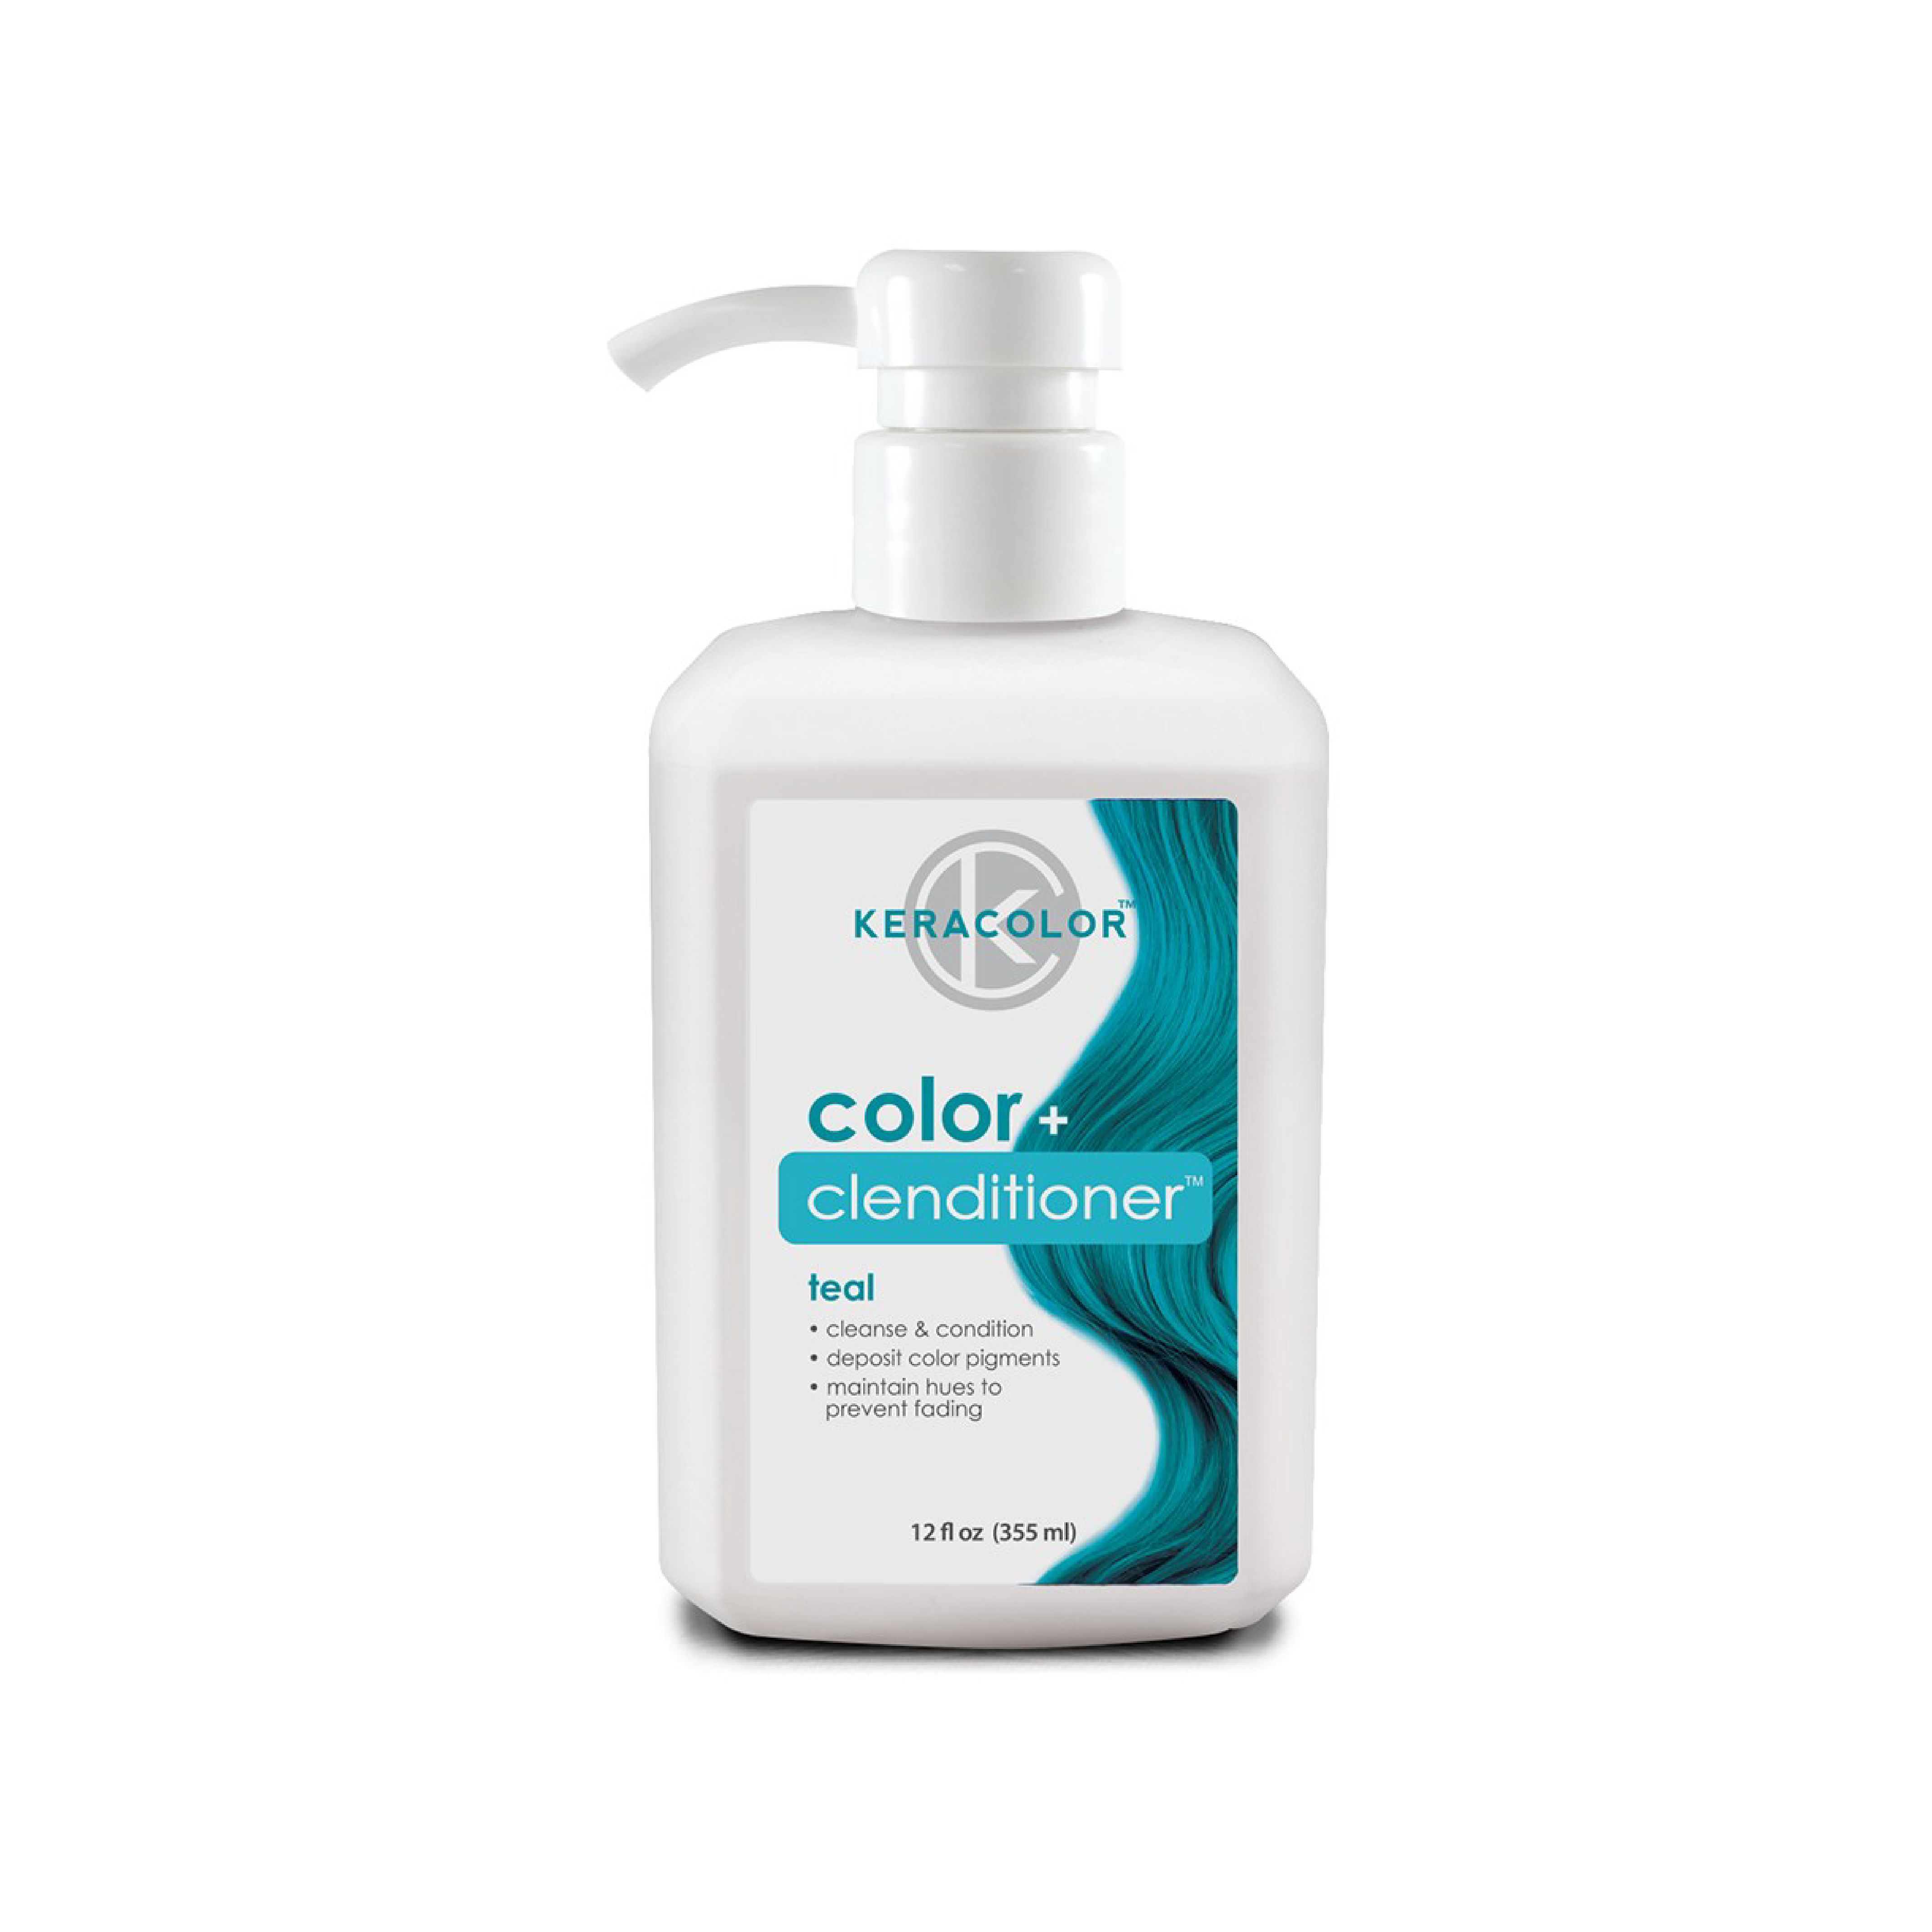 Keracolor Color Clenditioner Teal Colouring Shampoo - 355ml